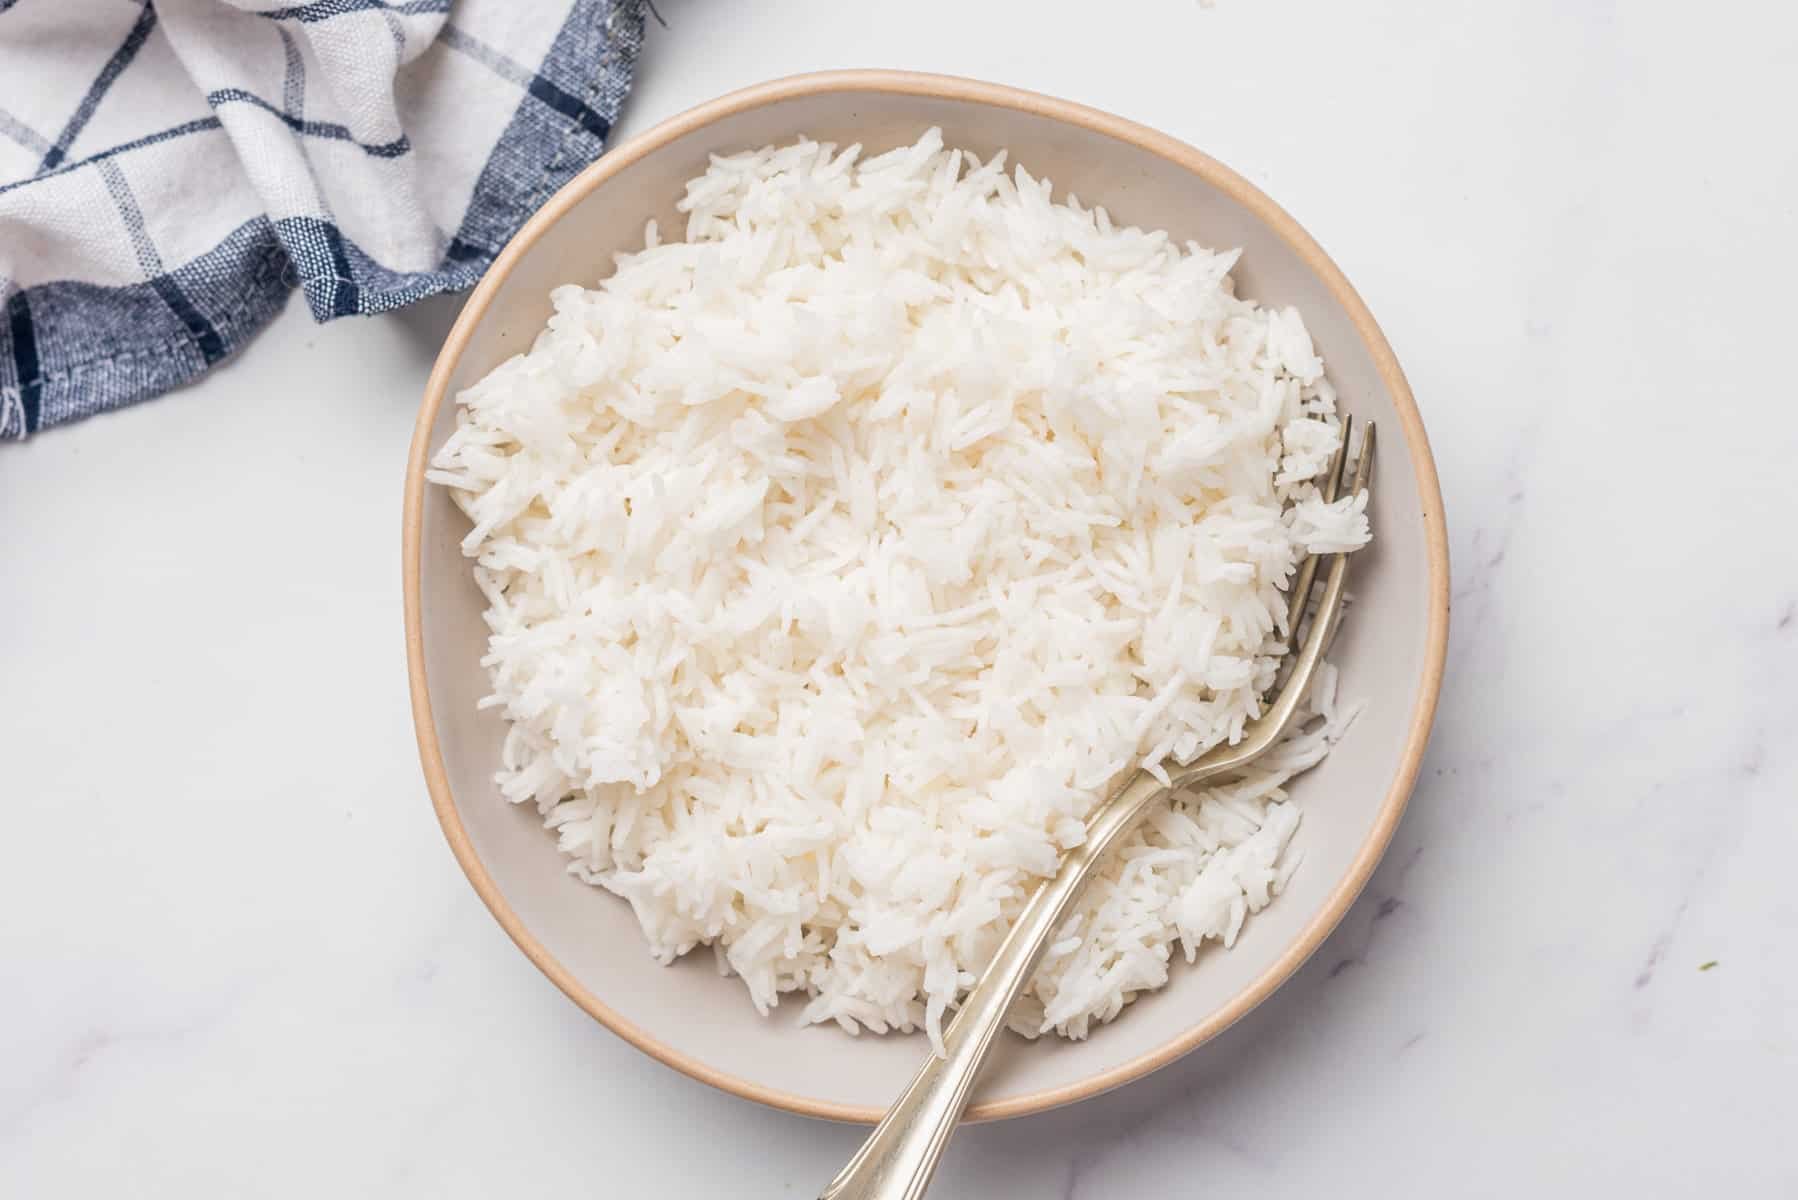 An image of a bowl full of white basmati rice with a spoon sitting on top of the rice.